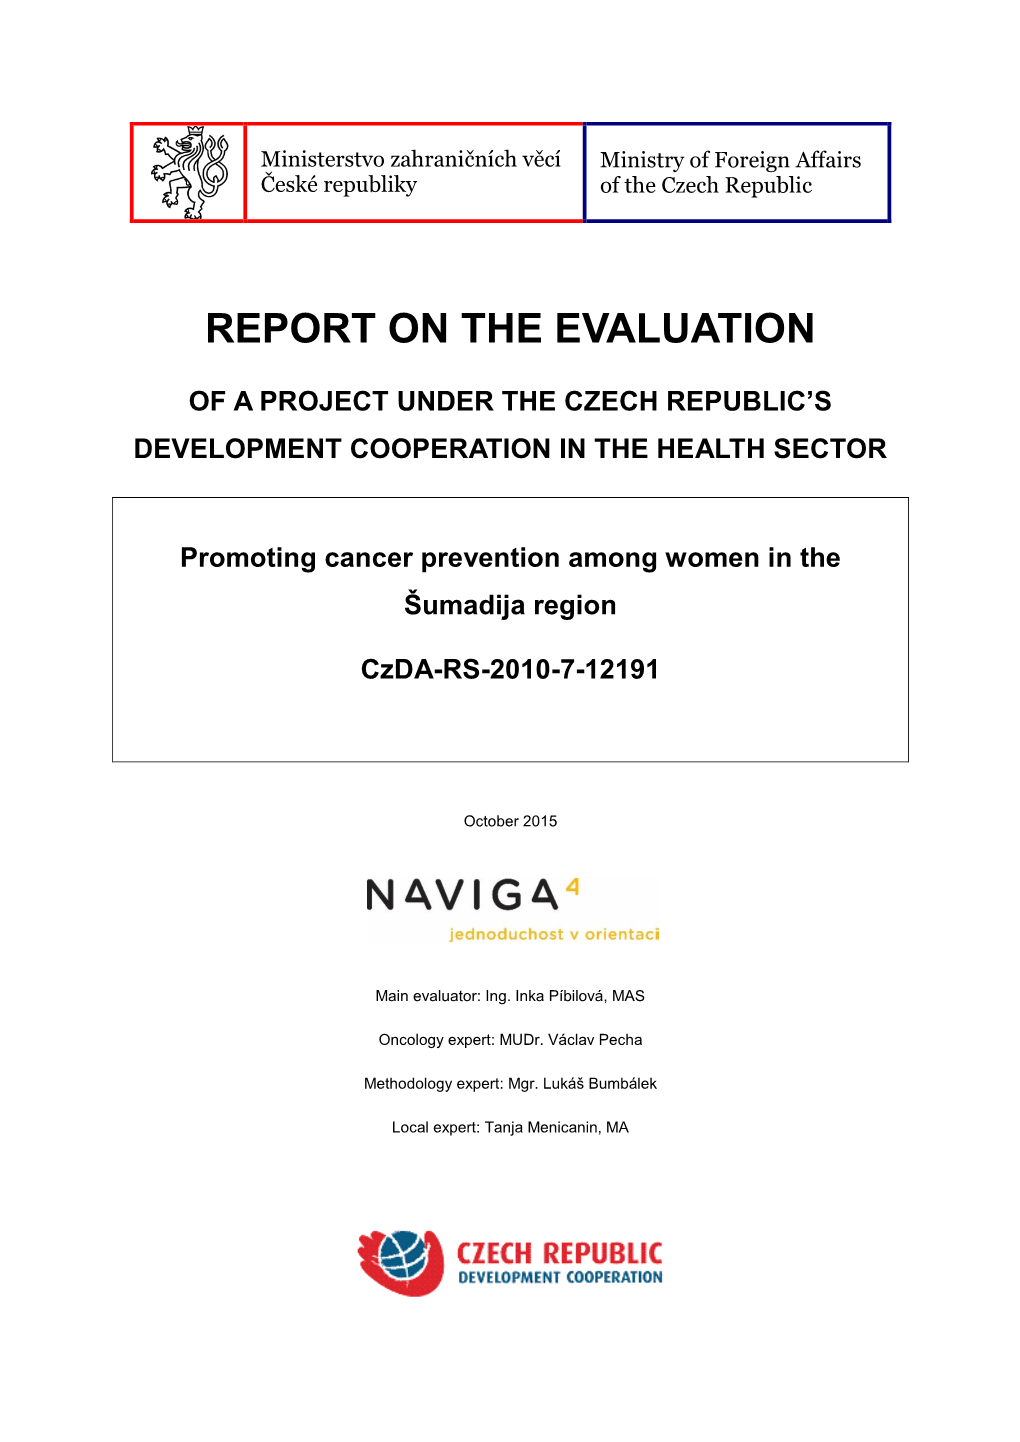 Report on the Evaluation